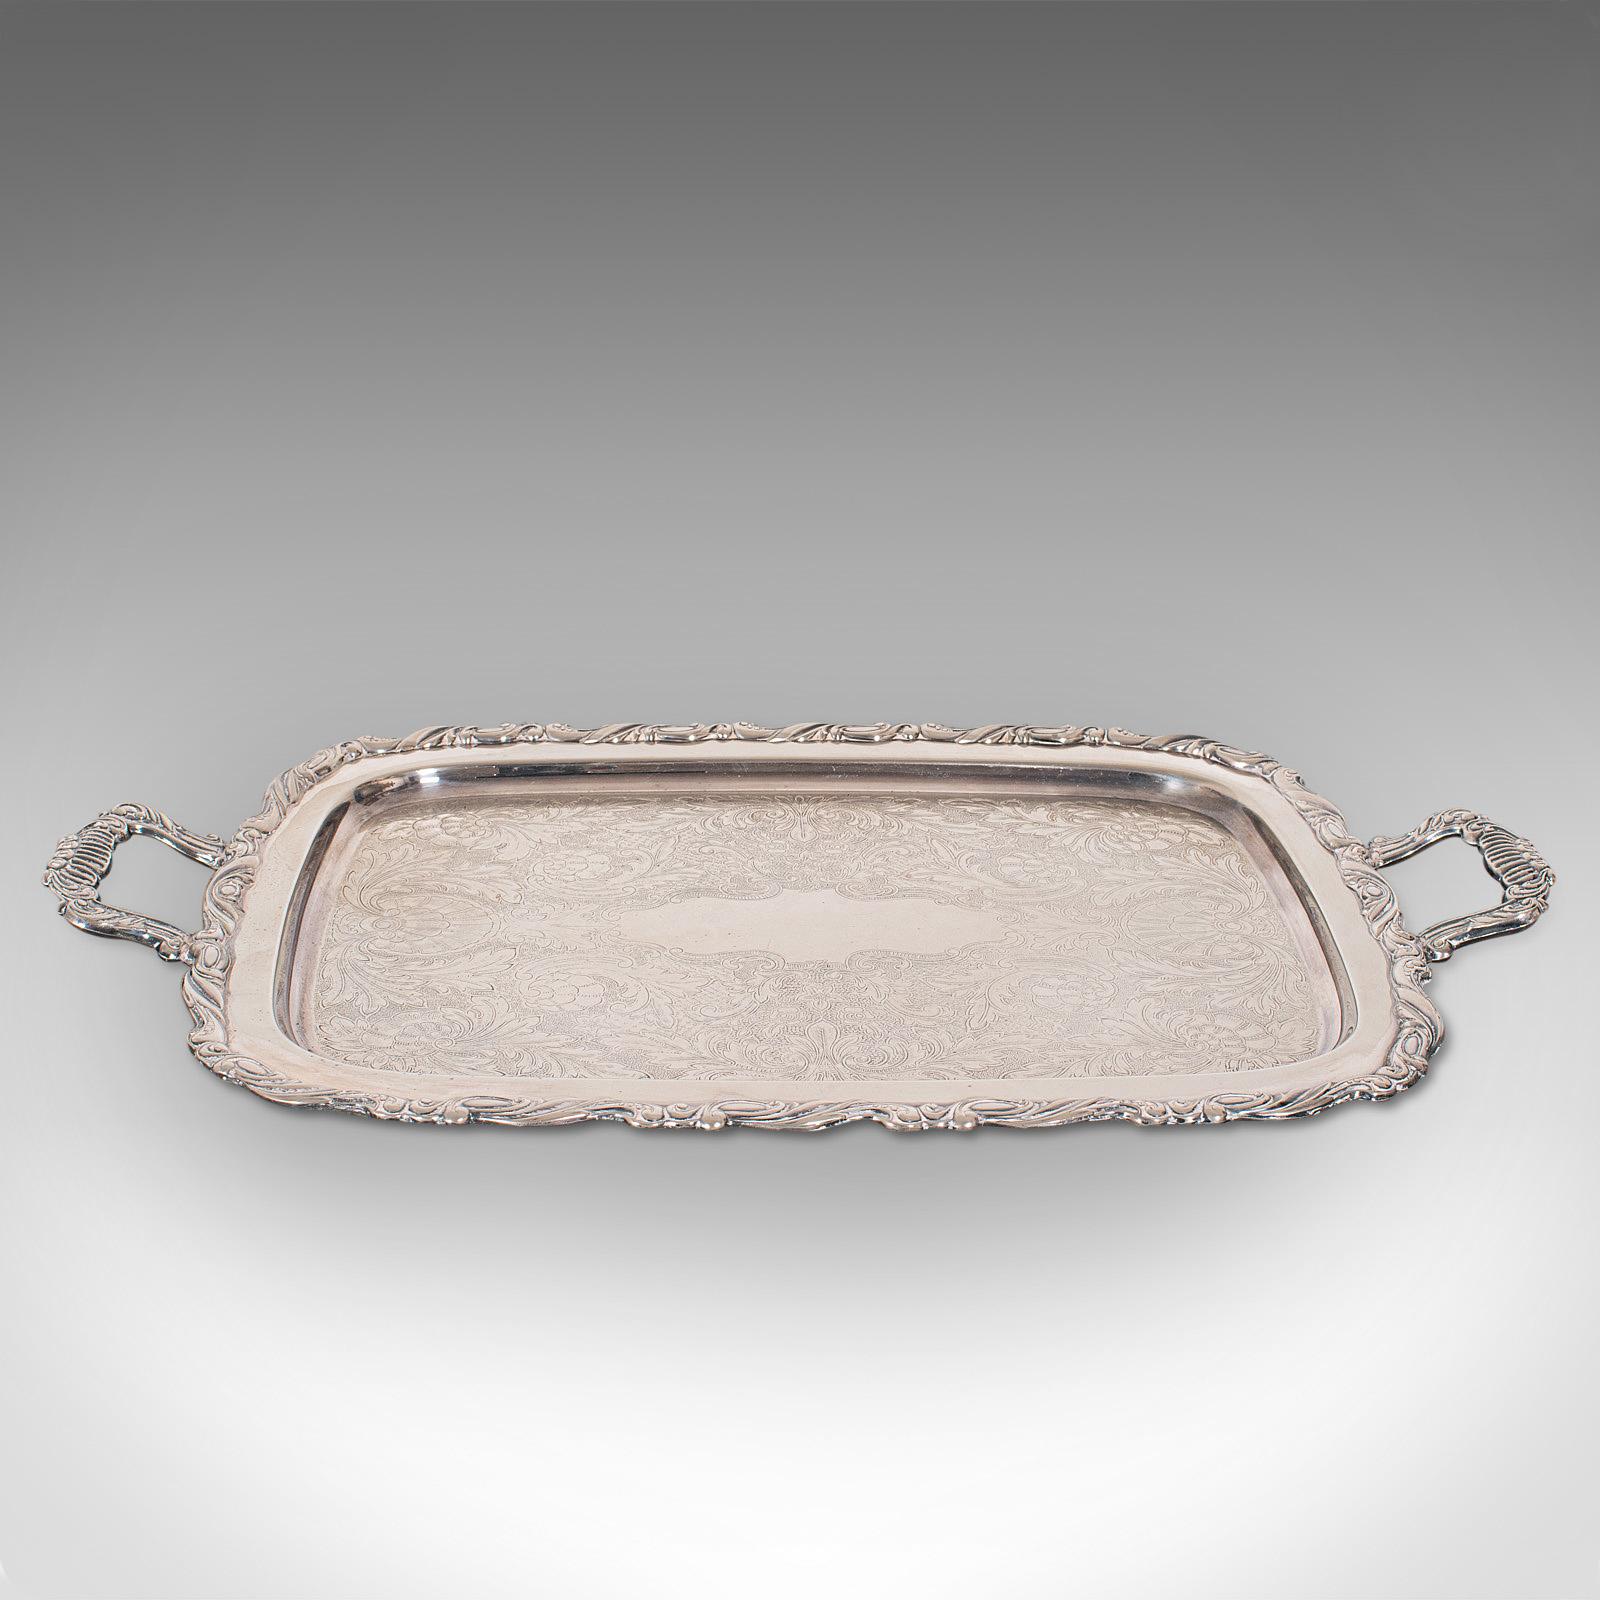 This is a vintage butler's serving tray. An American, silver plated tea platter by Oneida, dating to the mid-20th century, circa 1960.

Elegantly engraved service tray
Displays a desirable aged patina with minimal tarnish
Silver-plated with